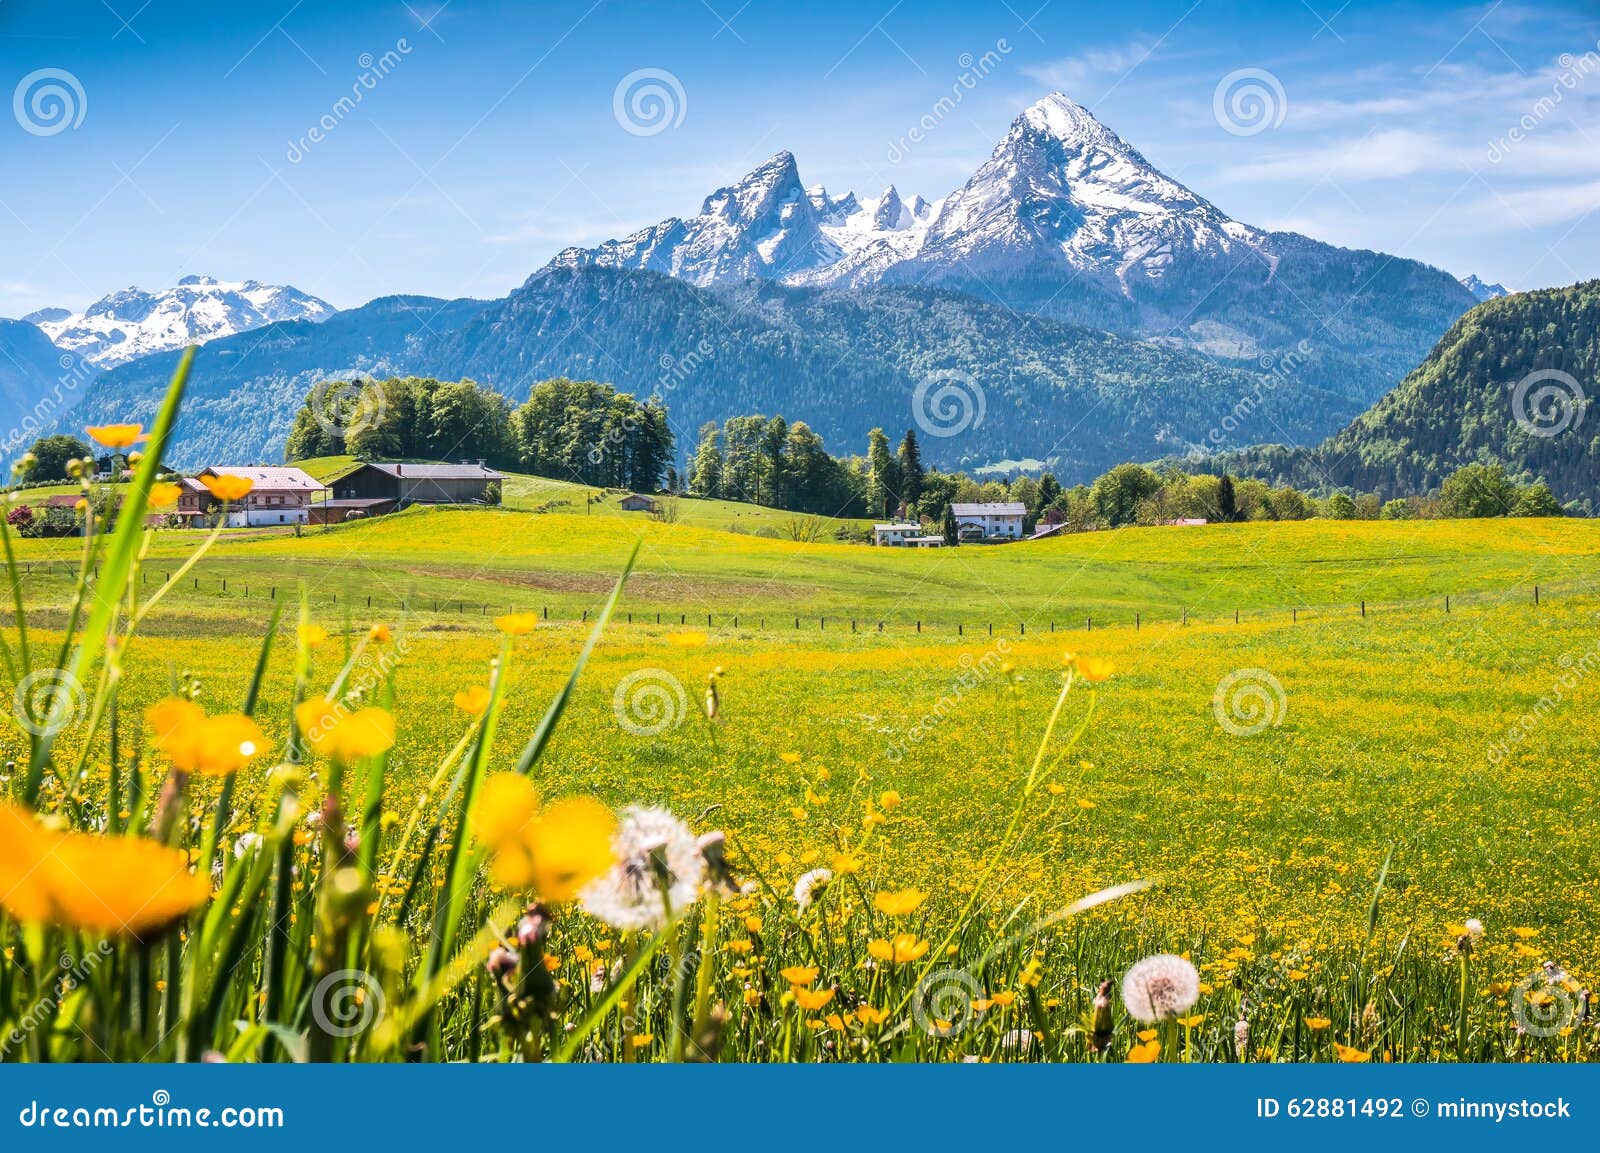 idyllic alpine landscape with green meadows, farmhouses and snowcapped mountain tops